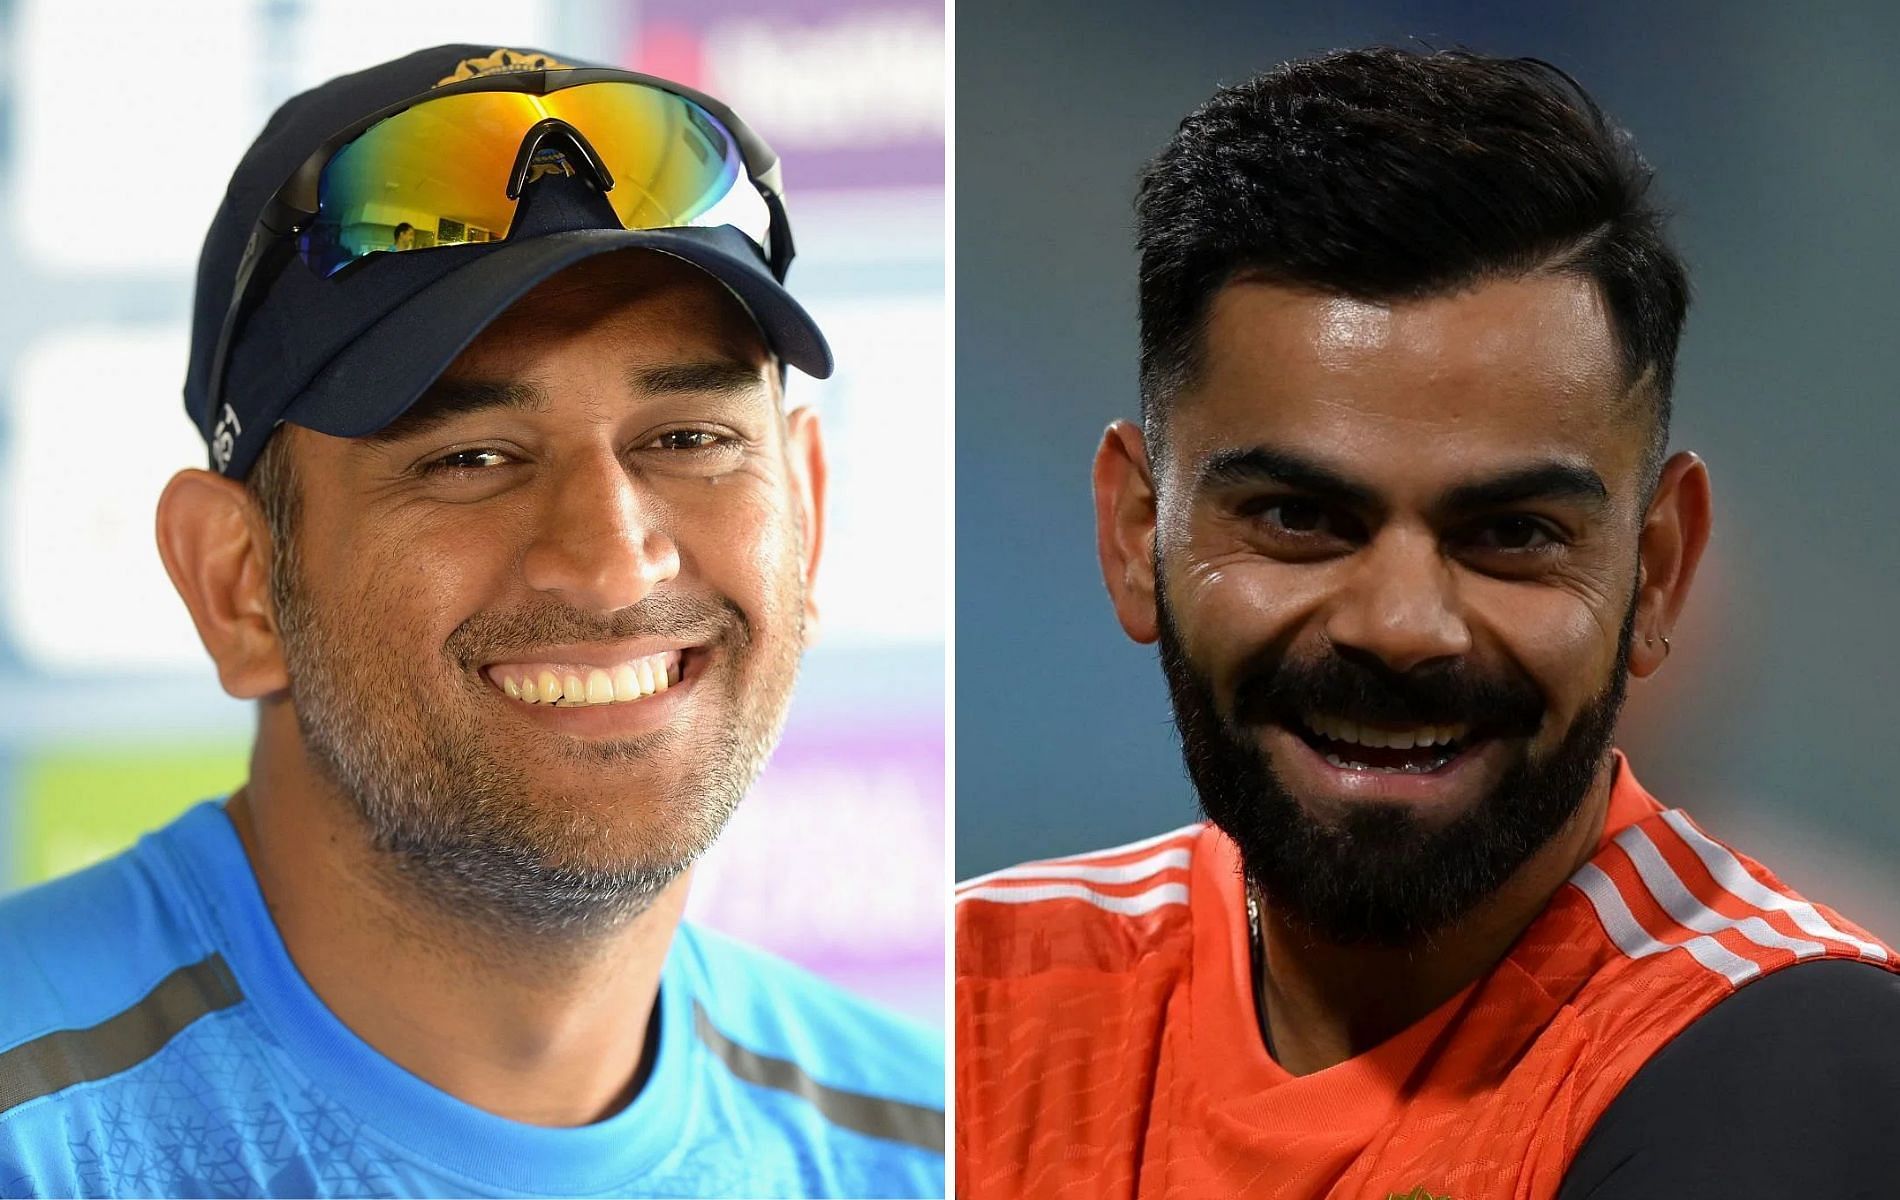 MS Dhoni as emcee, while Virat Kohli will take care of decoration - Dinesh Karthik on how Indian cricket stars would organize a wedding ceremony